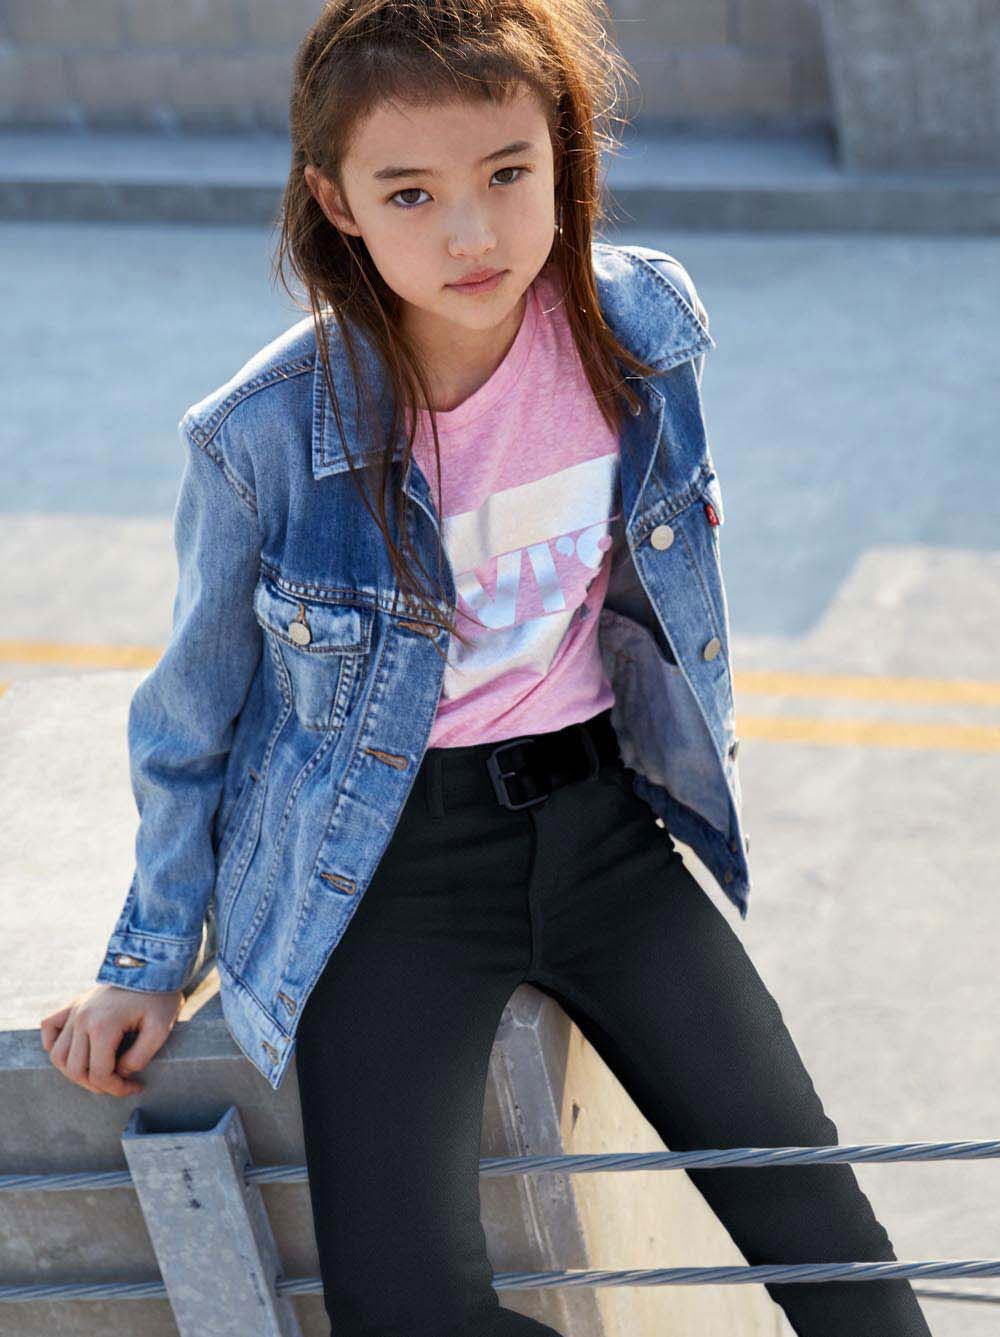 Levi’s launches an exciting winter kids' collection for girls | Edgars Mag